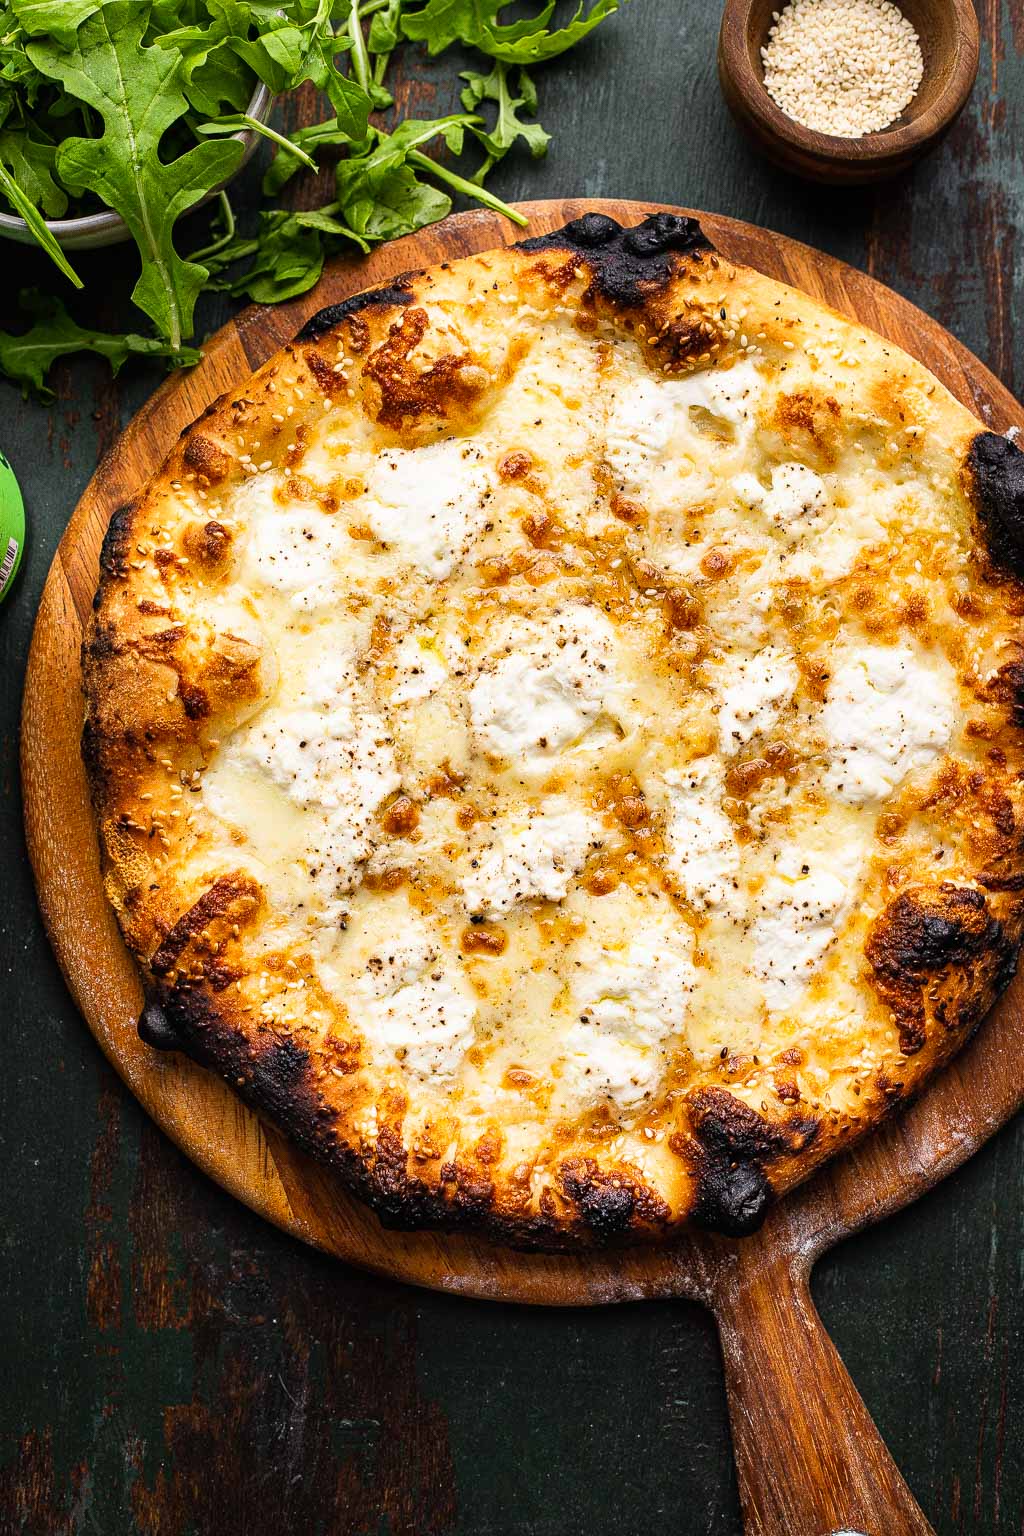 Grilled Pizza Bianca